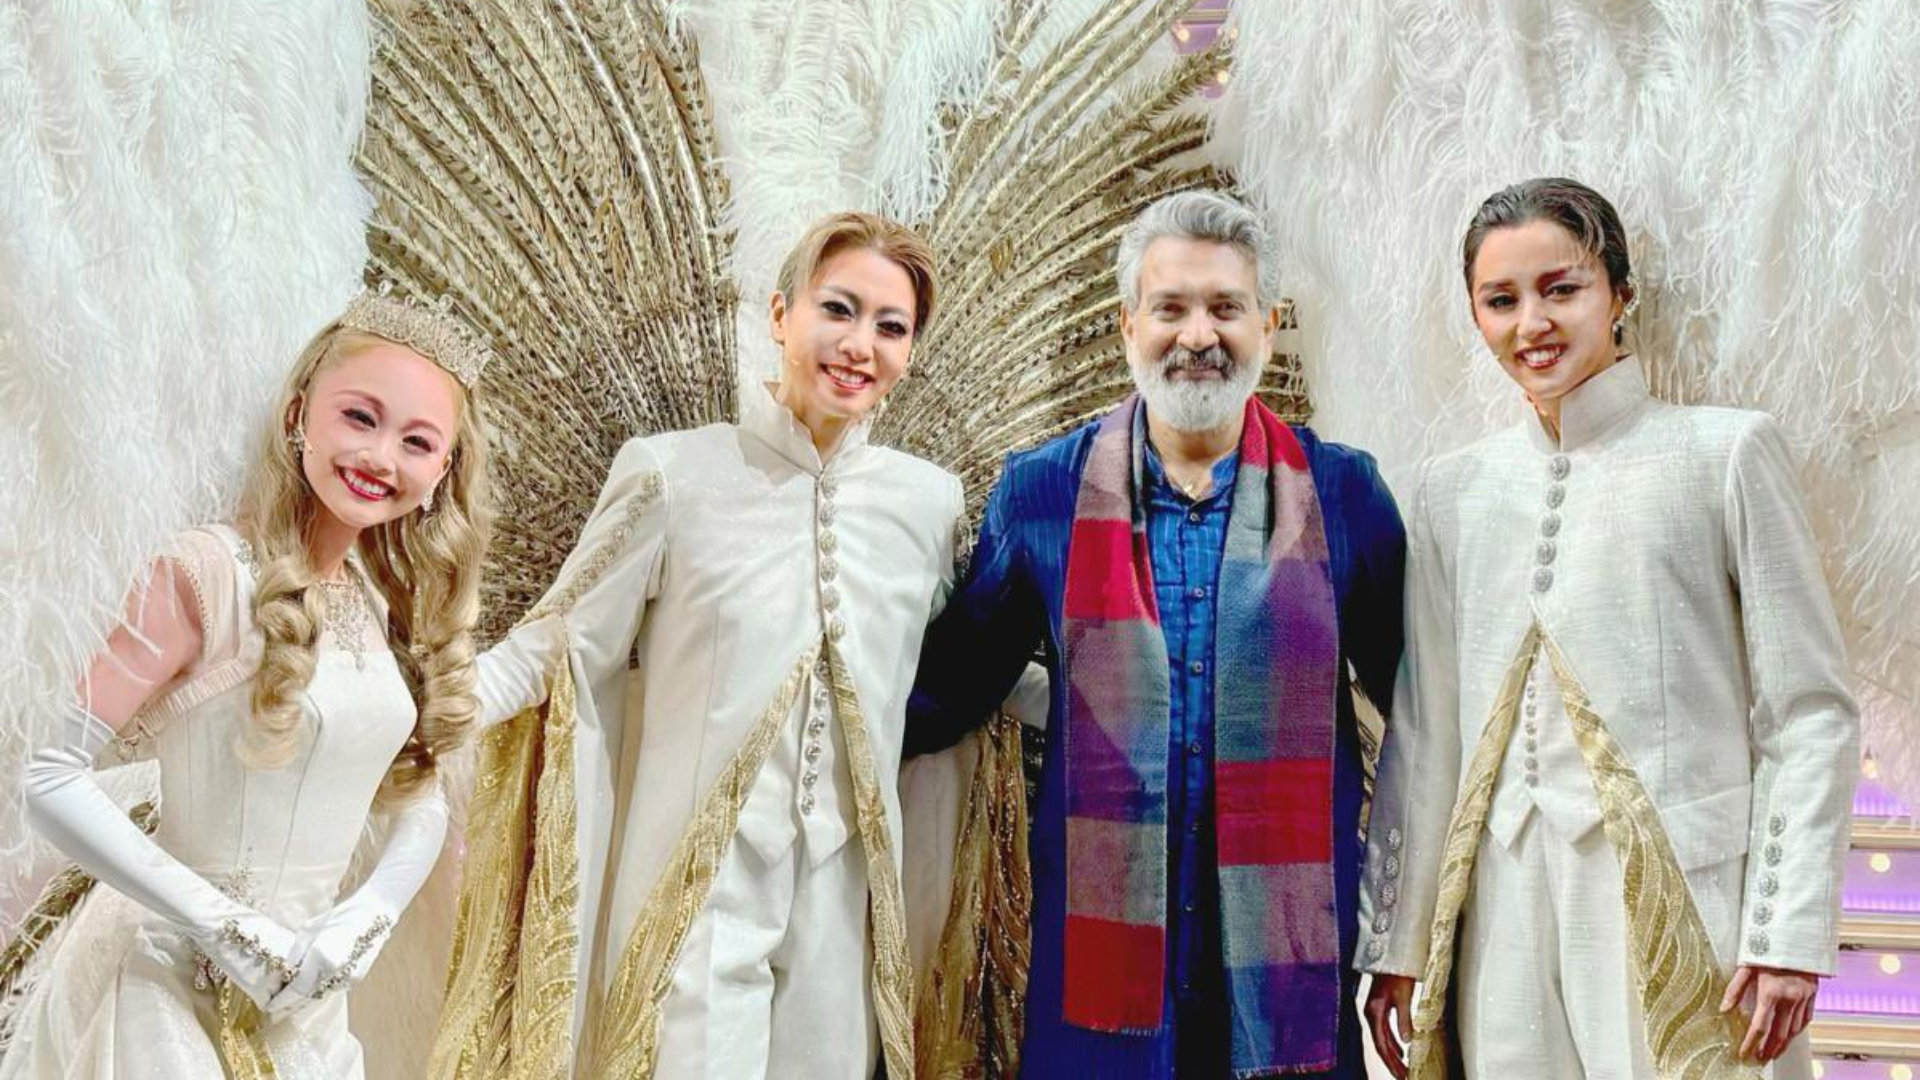 SS Rajamouli’s ‘RRR’ Gets Adapted Into A Broadway Play By A 110-Year-Old Takarazuka Company In Japan